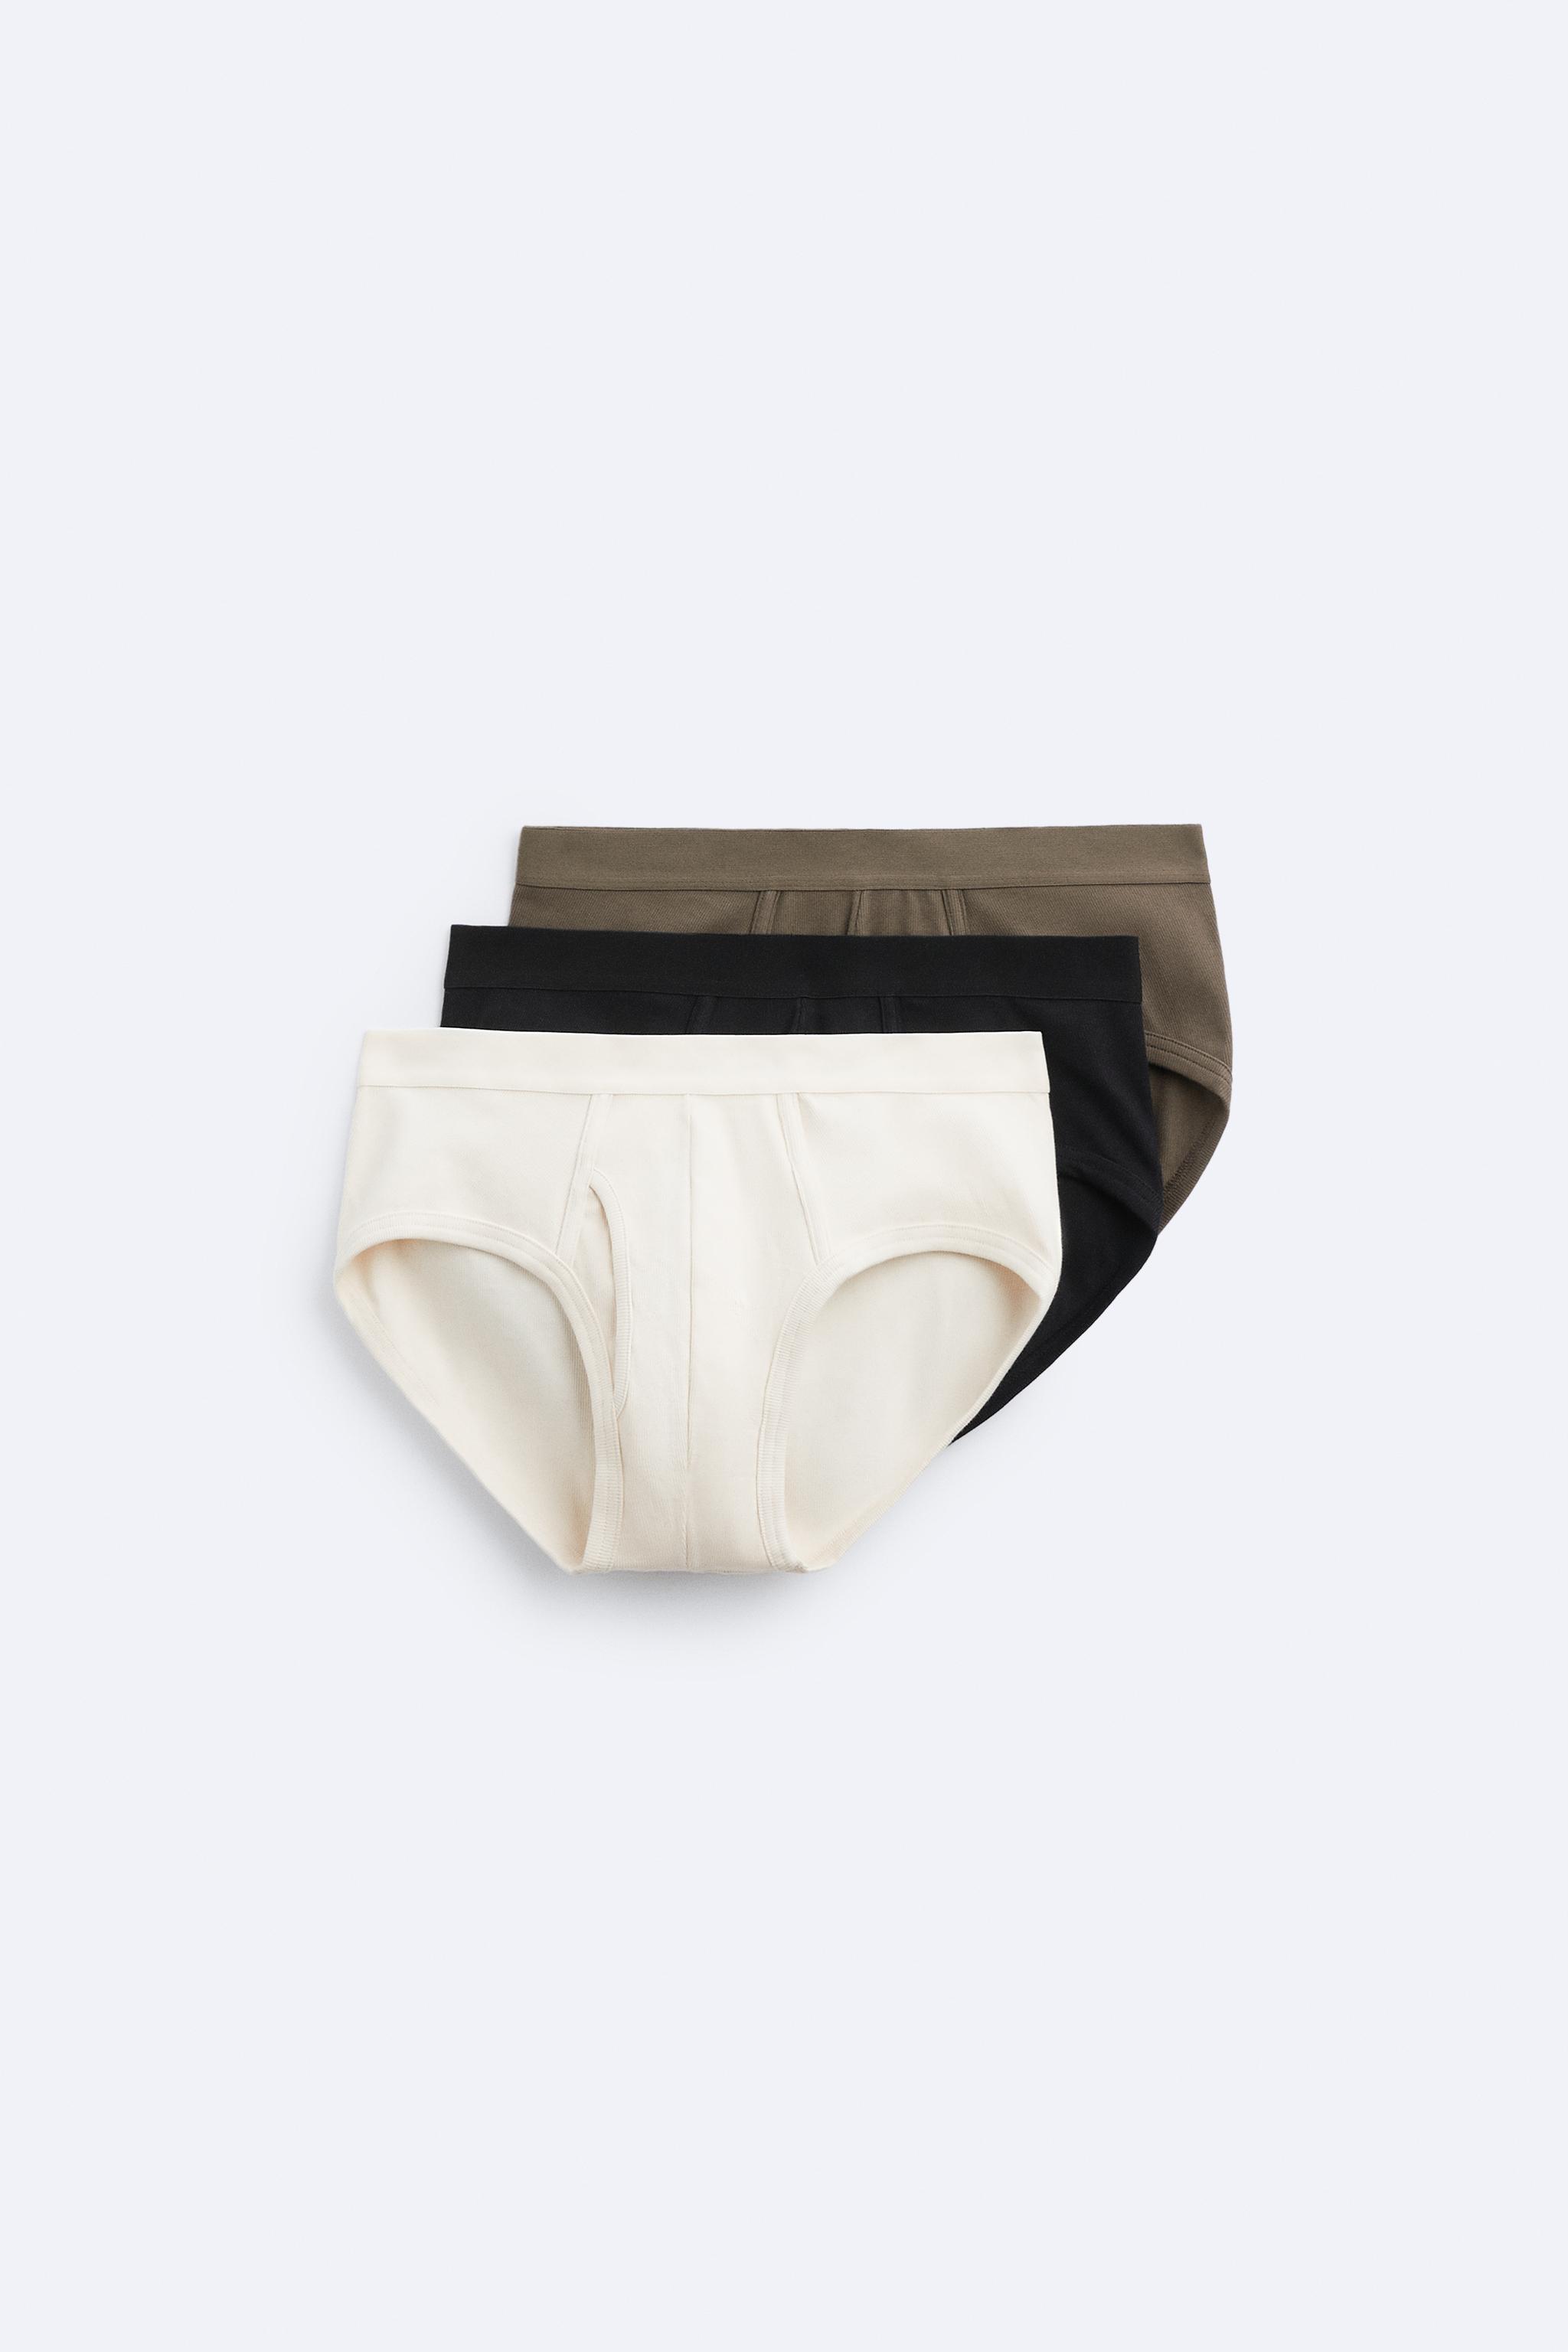 ZARA BOXERS available at 5 for 110gh wholesale at 22gh each MOQ 20 pie